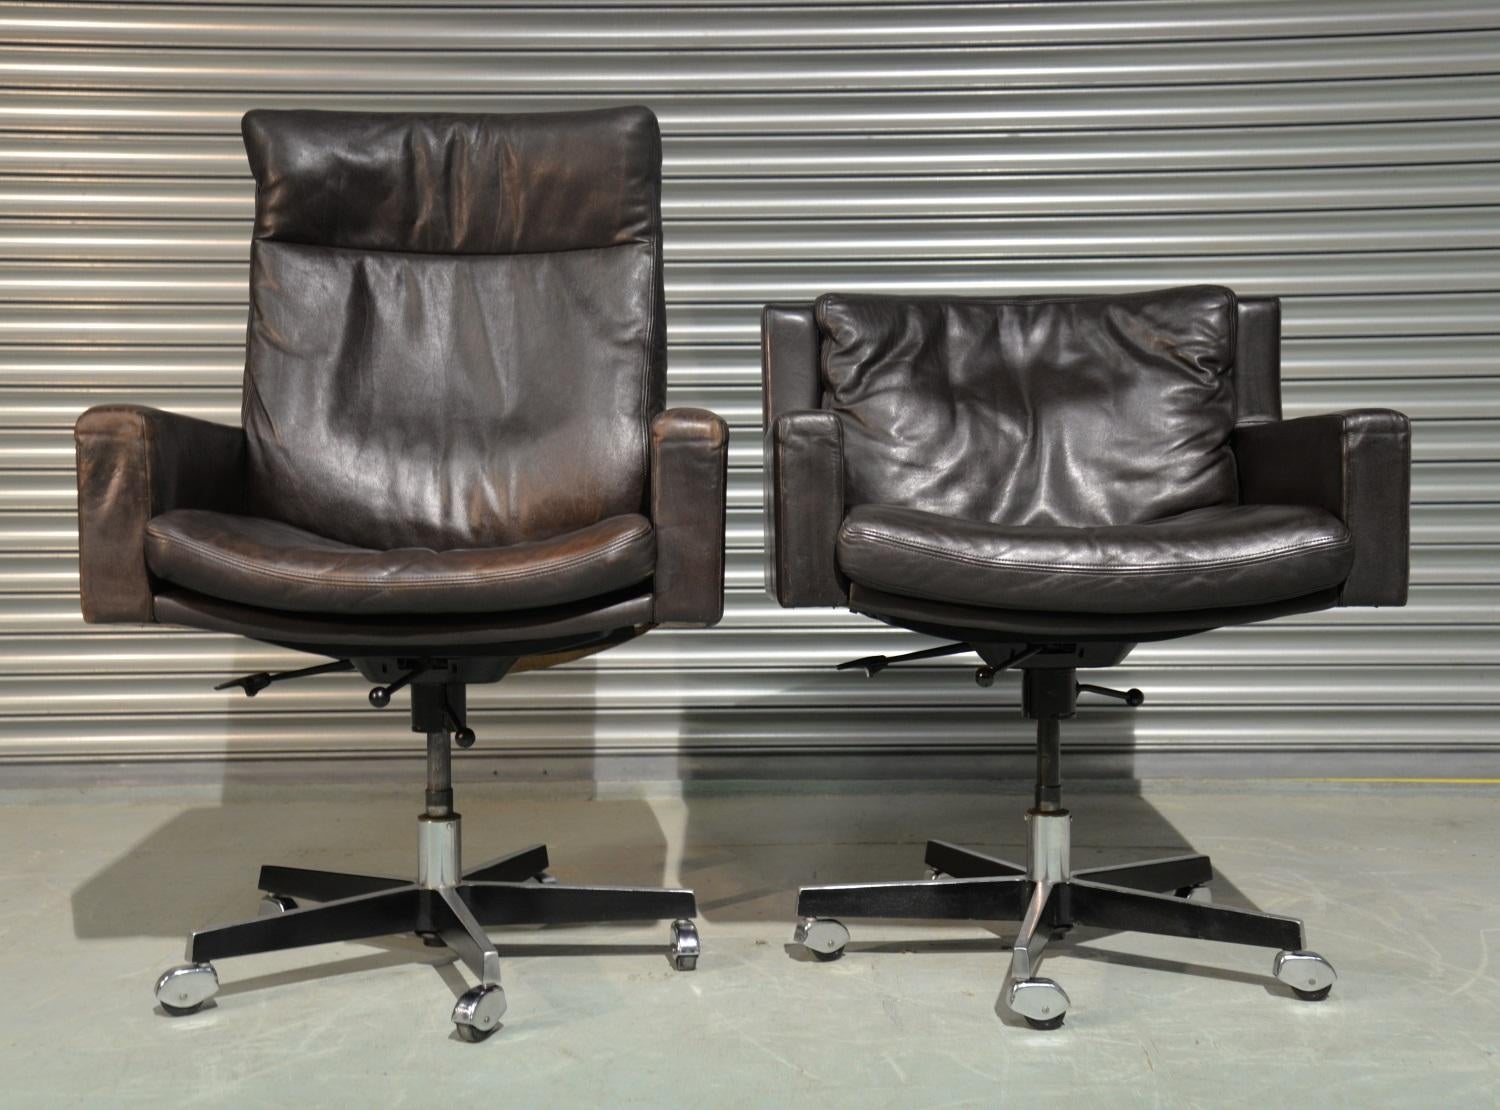 Discounted airfreight for our US and International customers ( from 2 weeks door to door )

We are delighted to bring to you a highly desirable pair of vintage Robert Haussmann swivel lounge armchairs for de Sede. Rarely available and built in the